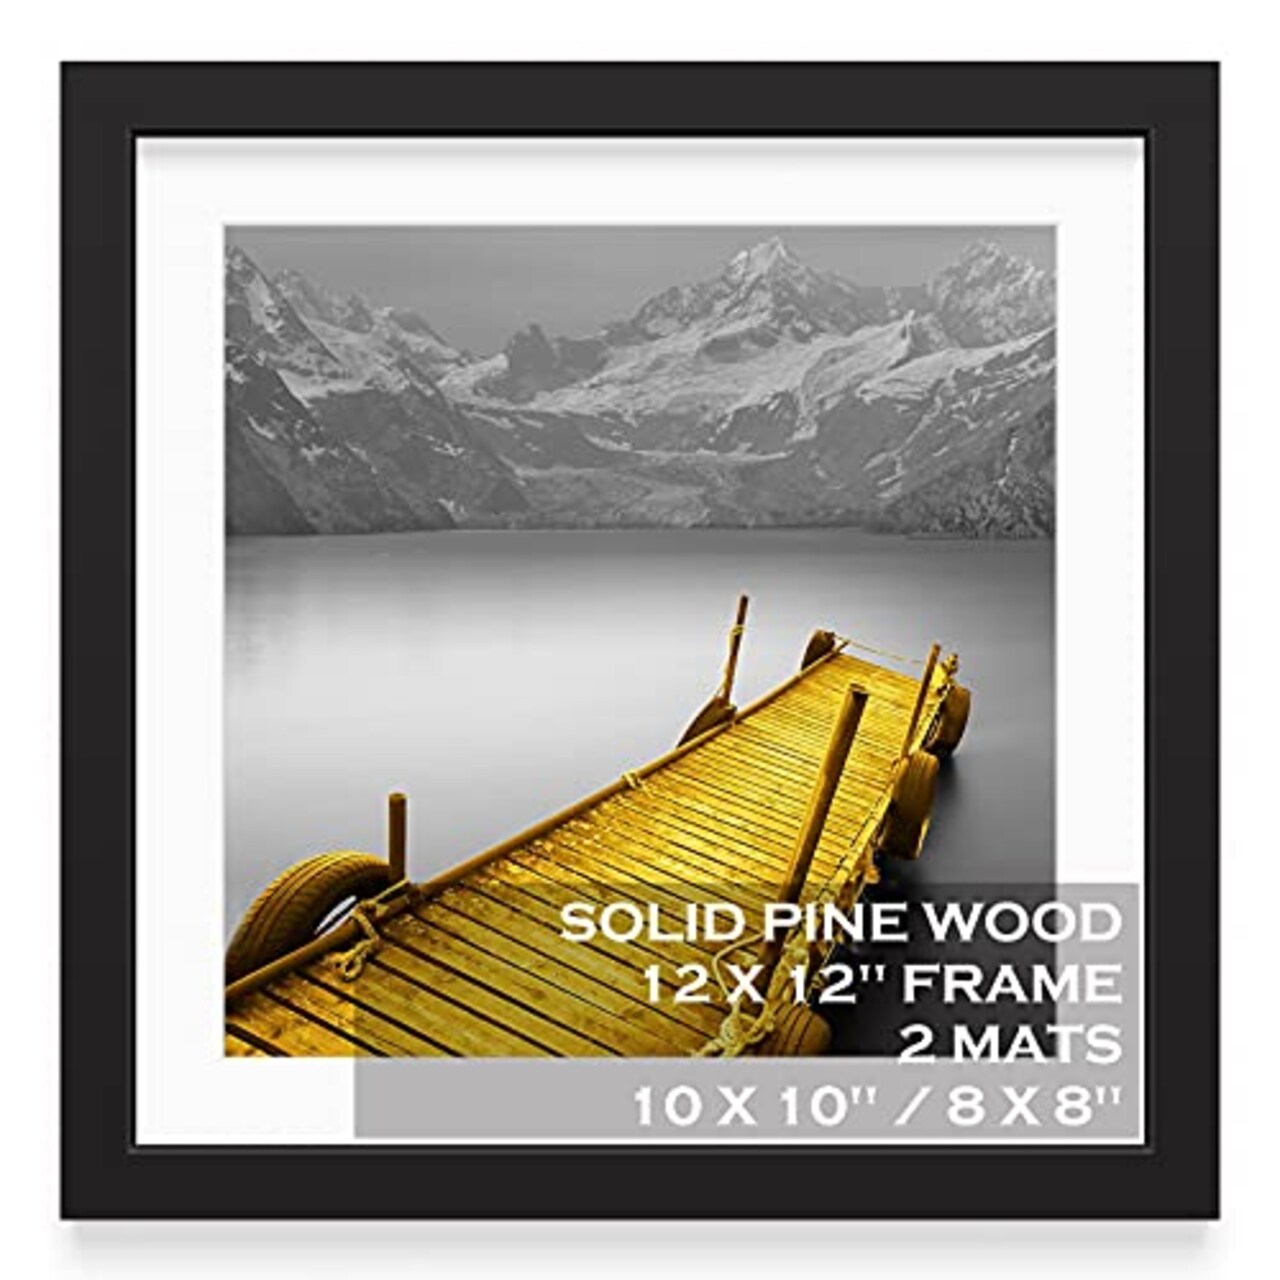 12x12 Picture Frames Black Solid Wood Display Pictures 10x10 or 8x8 with  Mat or 12x12 without Mat - 12x12 Inch Square Photo Frames with 2 Mats for  Wall or Tabletop Mount, 1 Pack